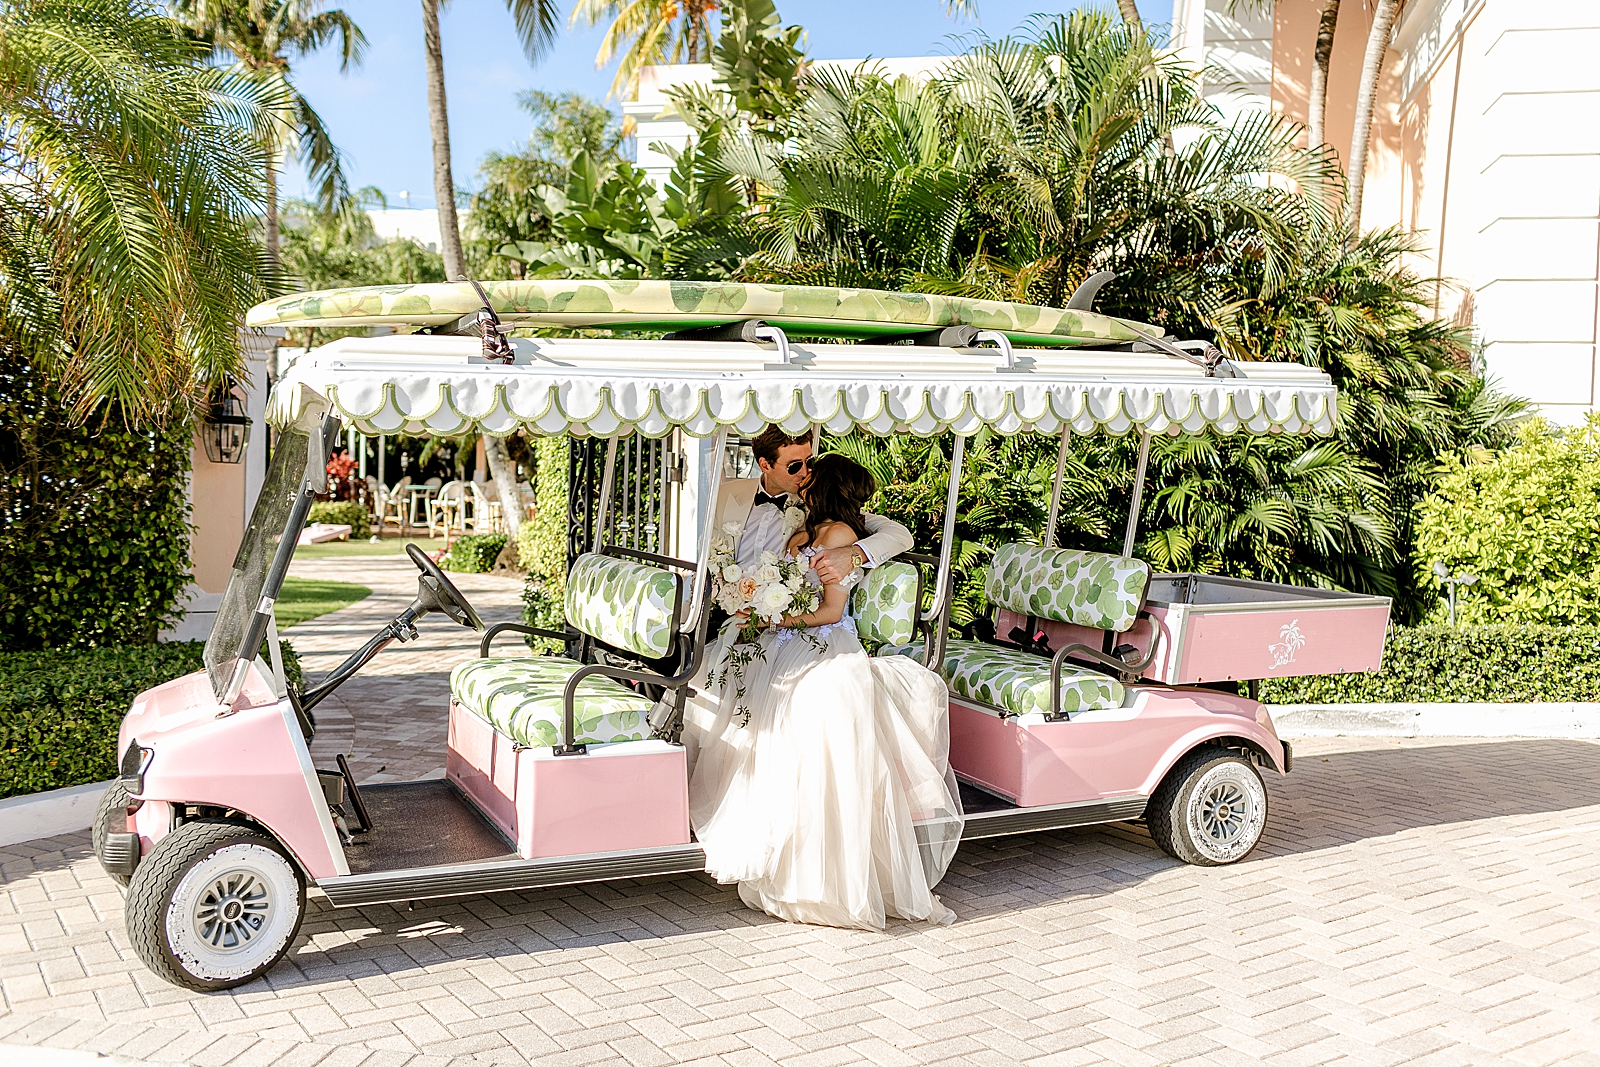 Bride and Groom kissing in Bright extended pink golf cart 